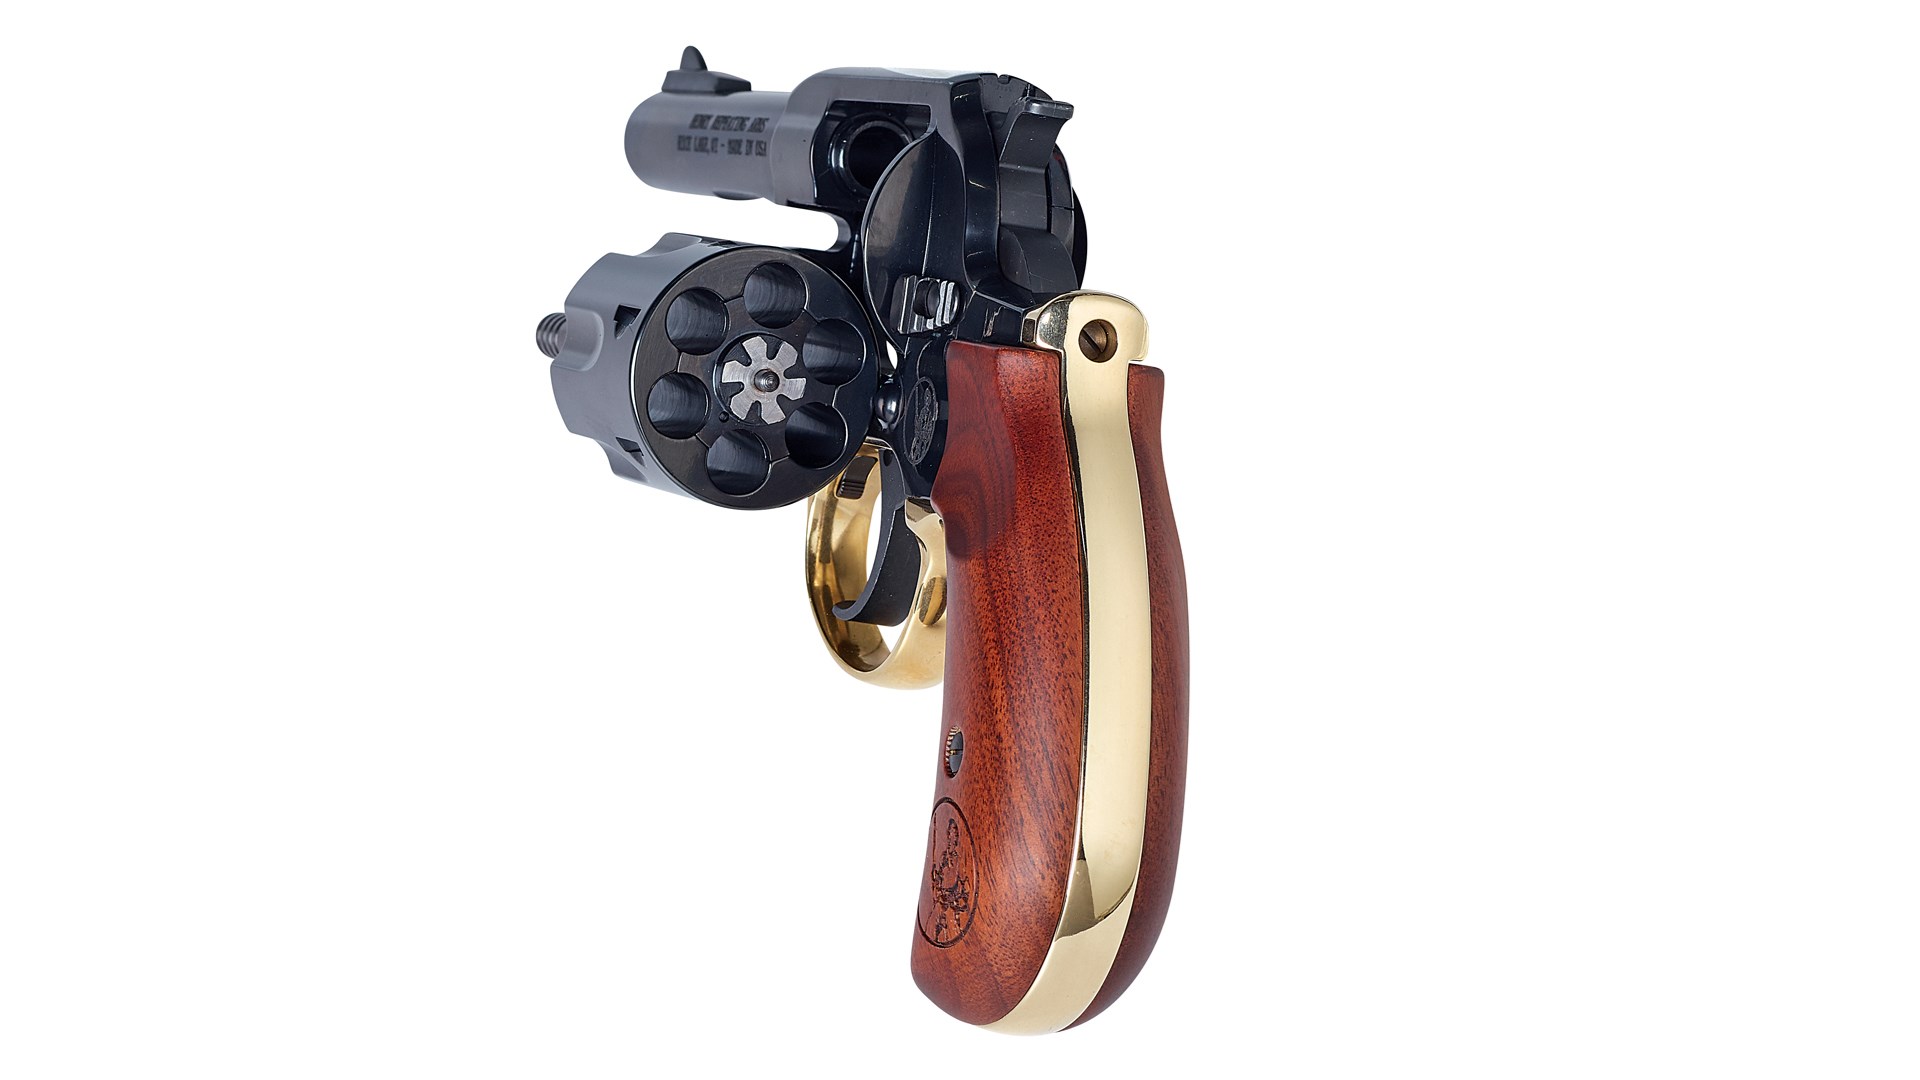 Rear view of the Henry Big Boy revolver with the cylinder opened to the left side and showing the brass grip frame.